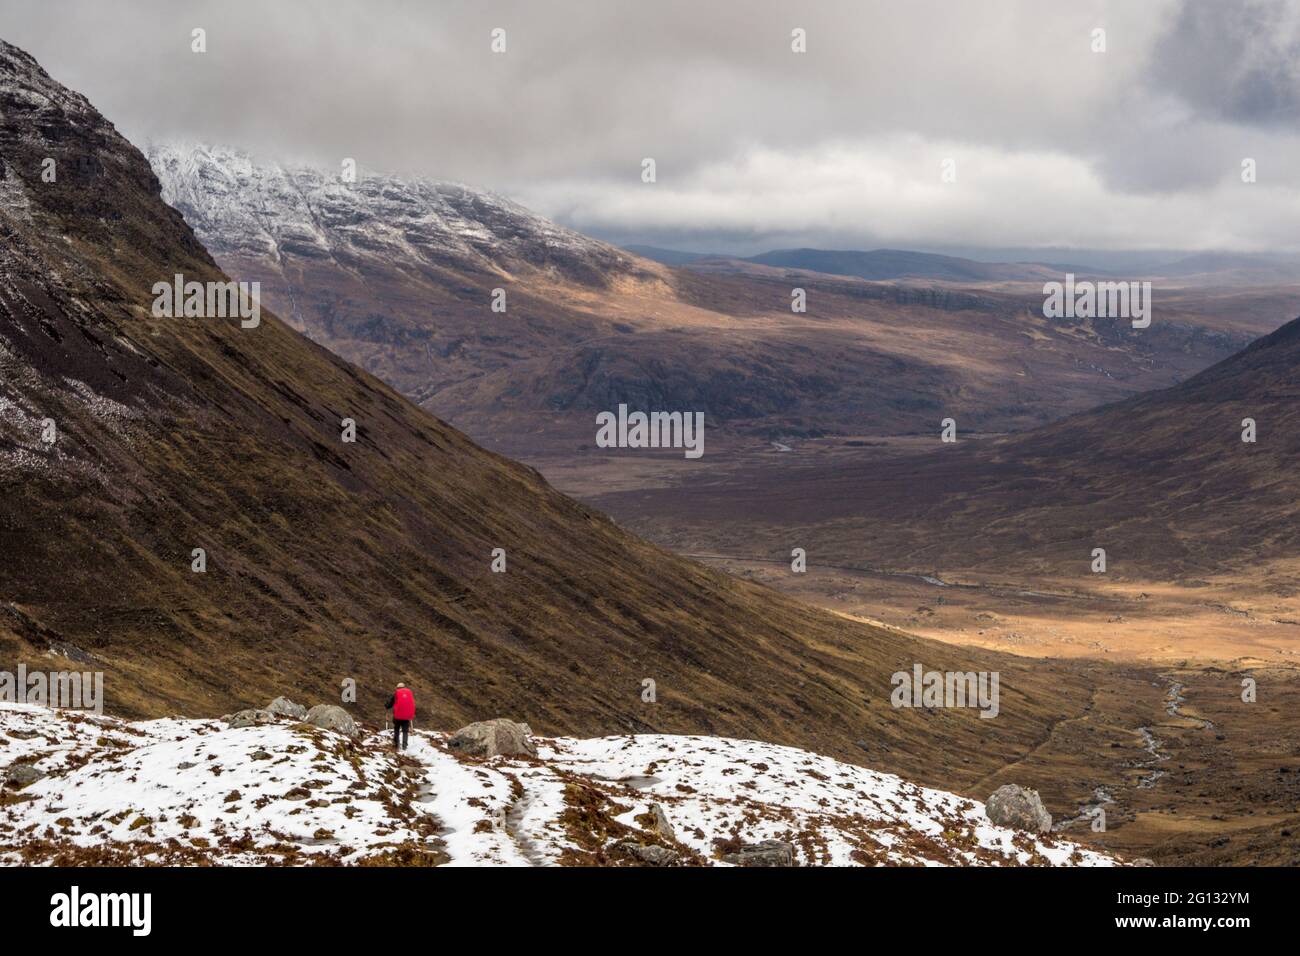 A backpacker with rucksack in the North West Highlands of Scotland Stock Photo